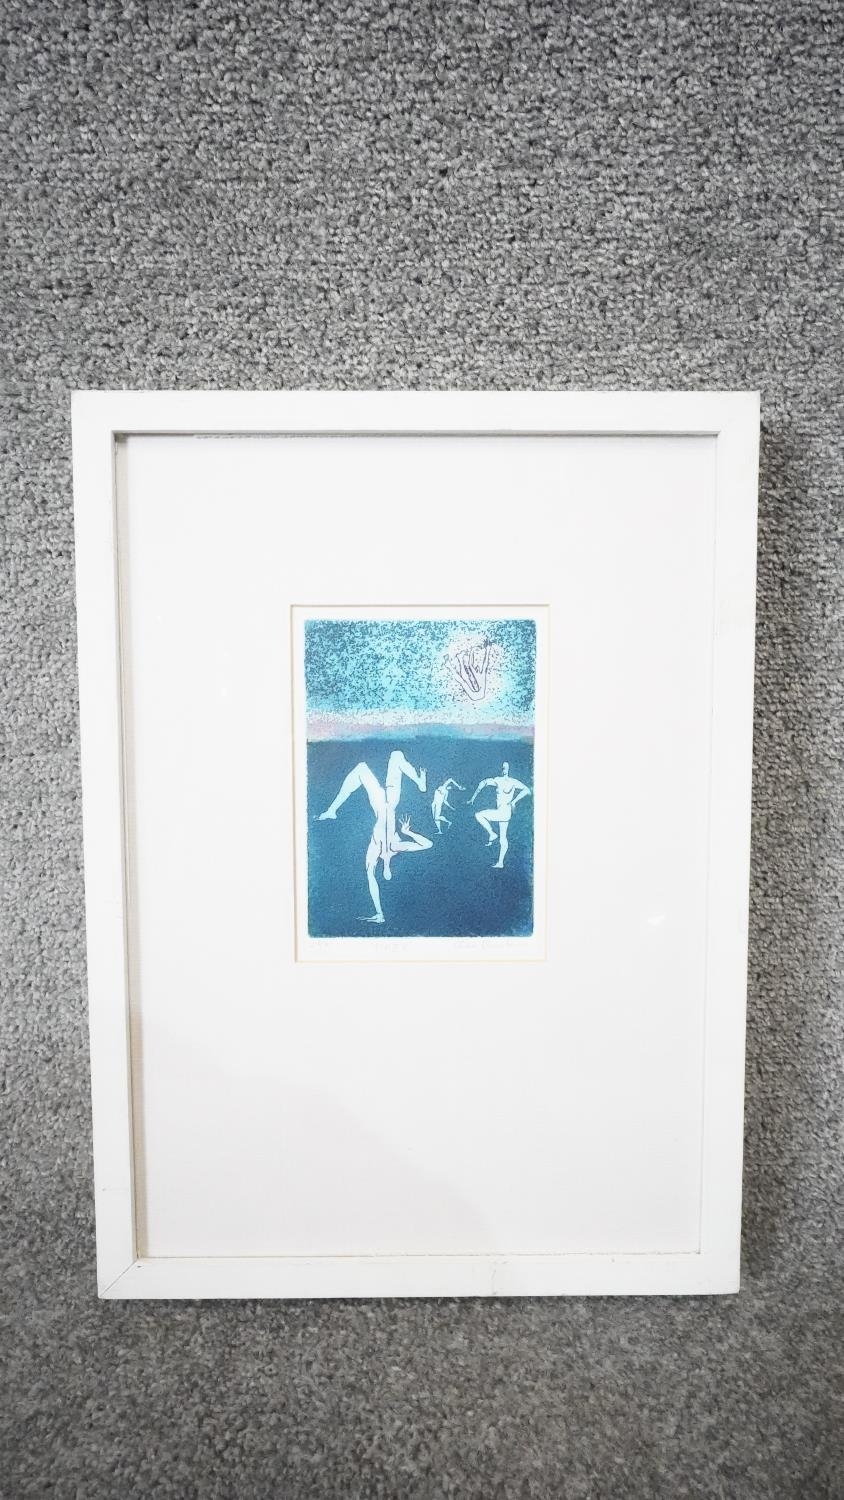 A framed and glazed limited signed etching by American artist Aimee Birnbaum, titled 'Yipee', - Image 2 of 4